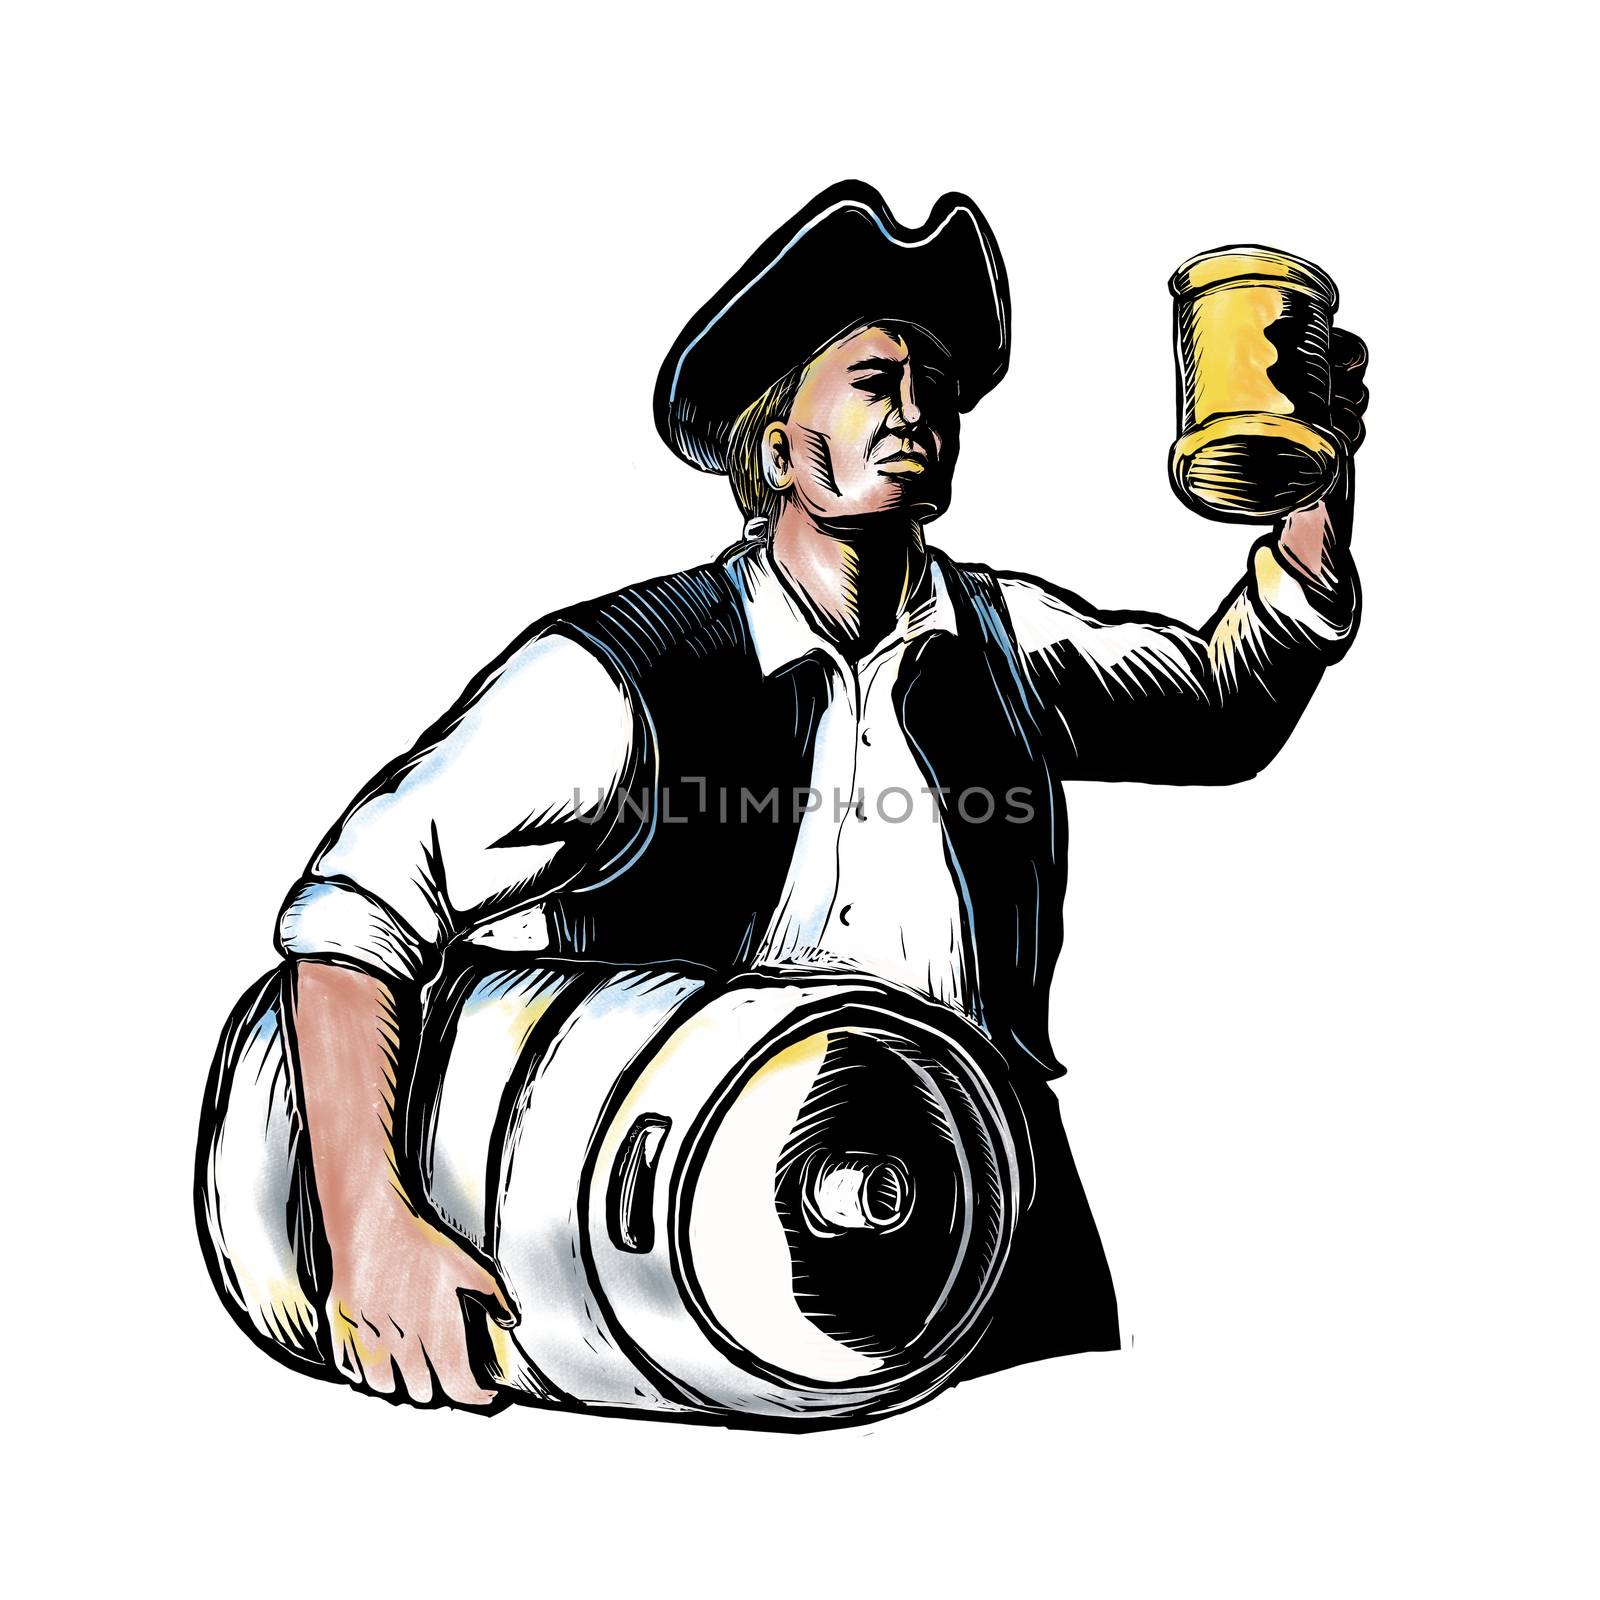 Scratchboard style illustration of an American Patriot Carrying  Beer Keg drum and holding up an ale mug on isolated background.
